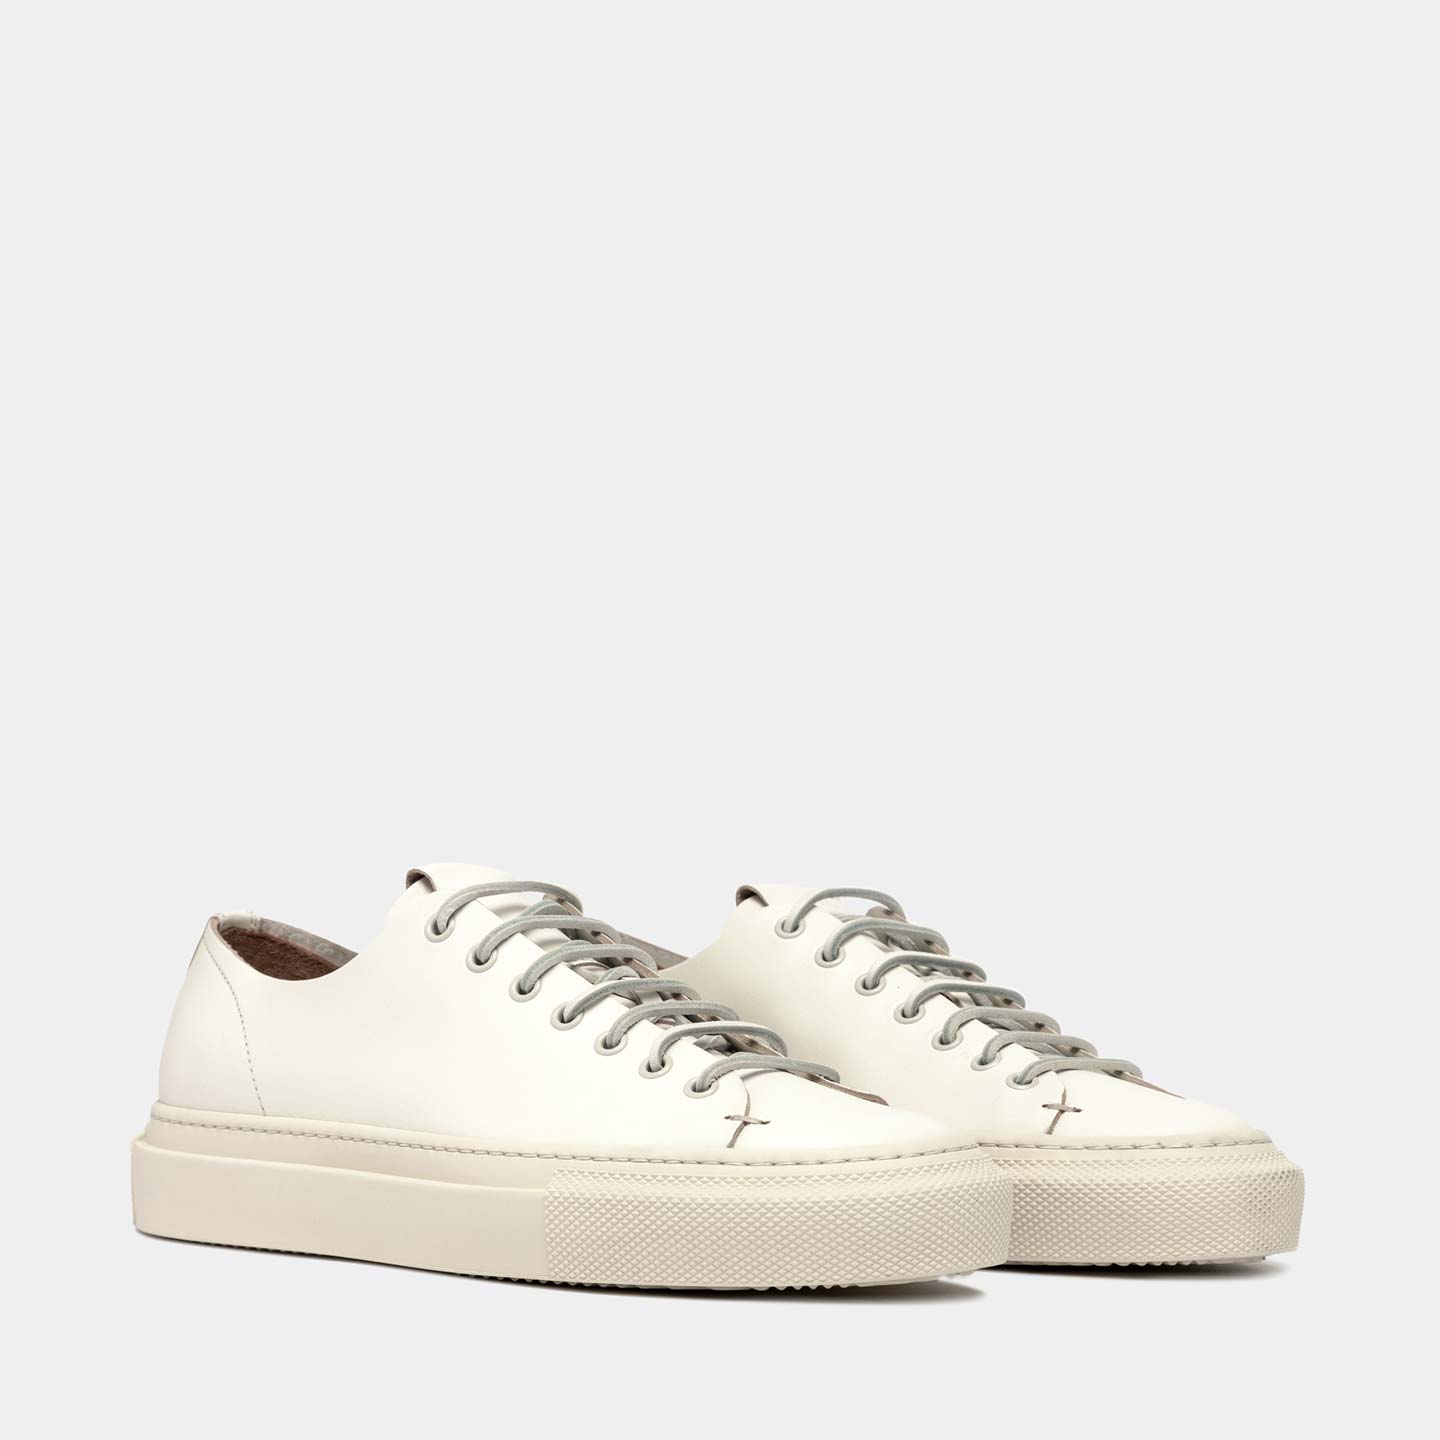 BUTTERO TANINA SNEAKERS IN WHITE LEATHER B10380ROUS-DG1/02-BIANCO